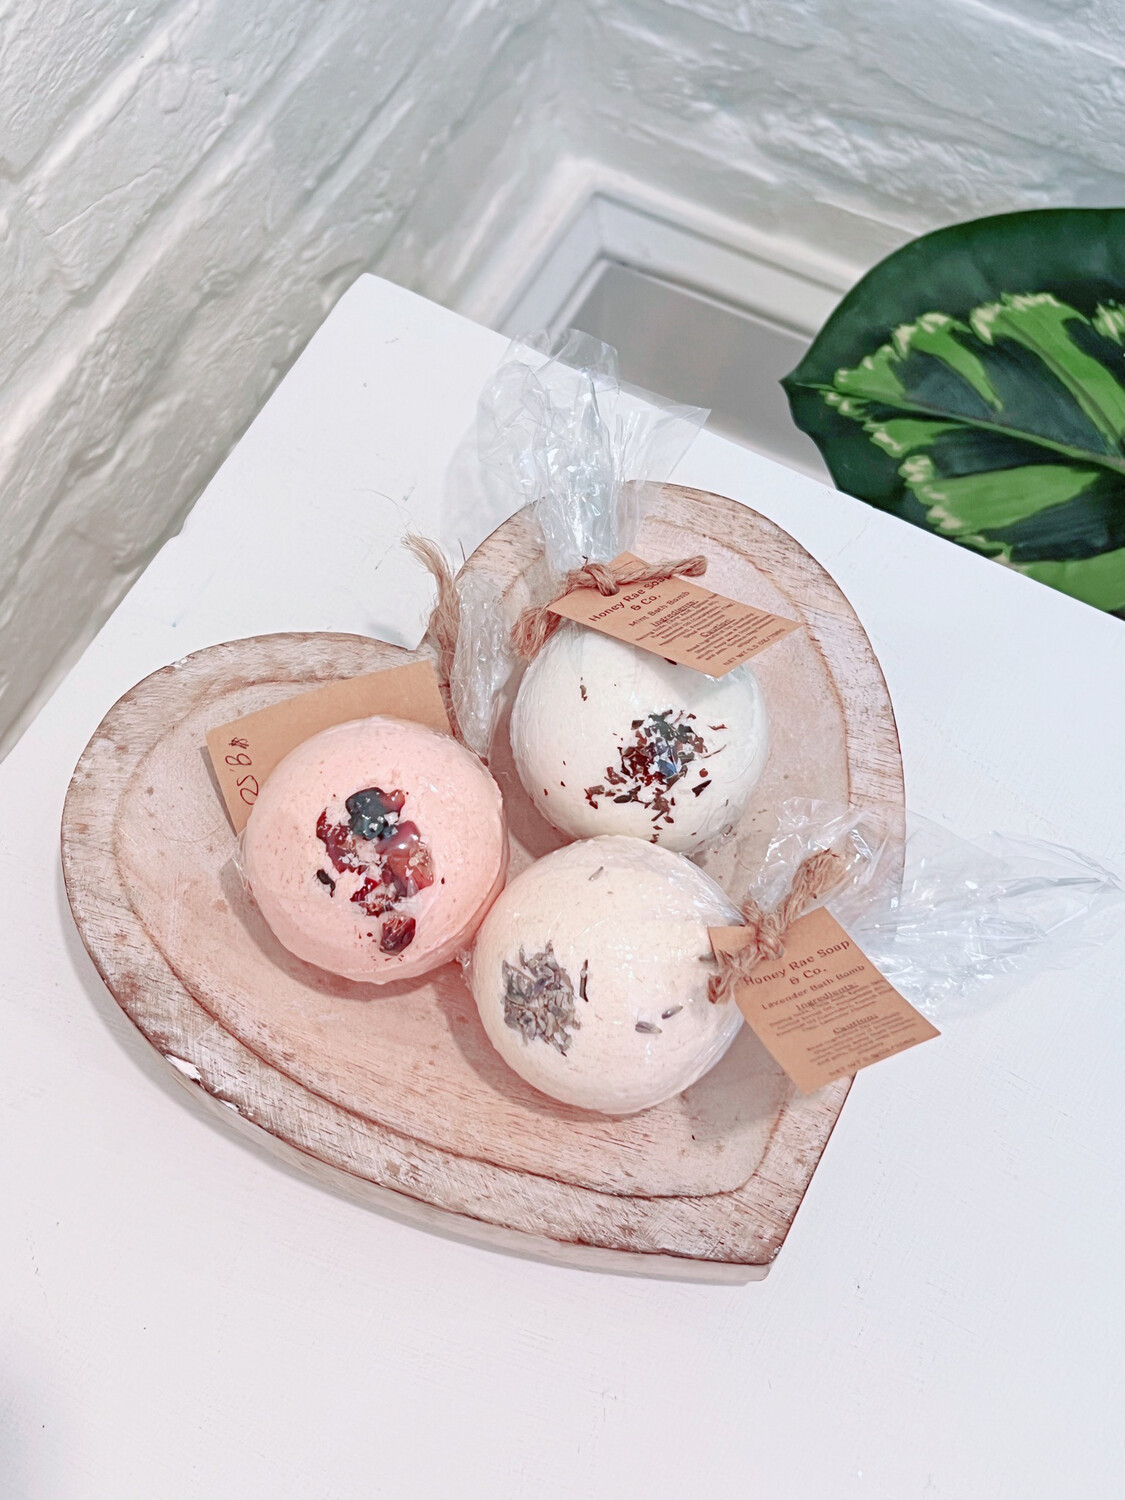 Rose Bath Bomb - Hand-Crafted In Honeybrook Pennsylvania With Essential Oils And All Natural Ingredients